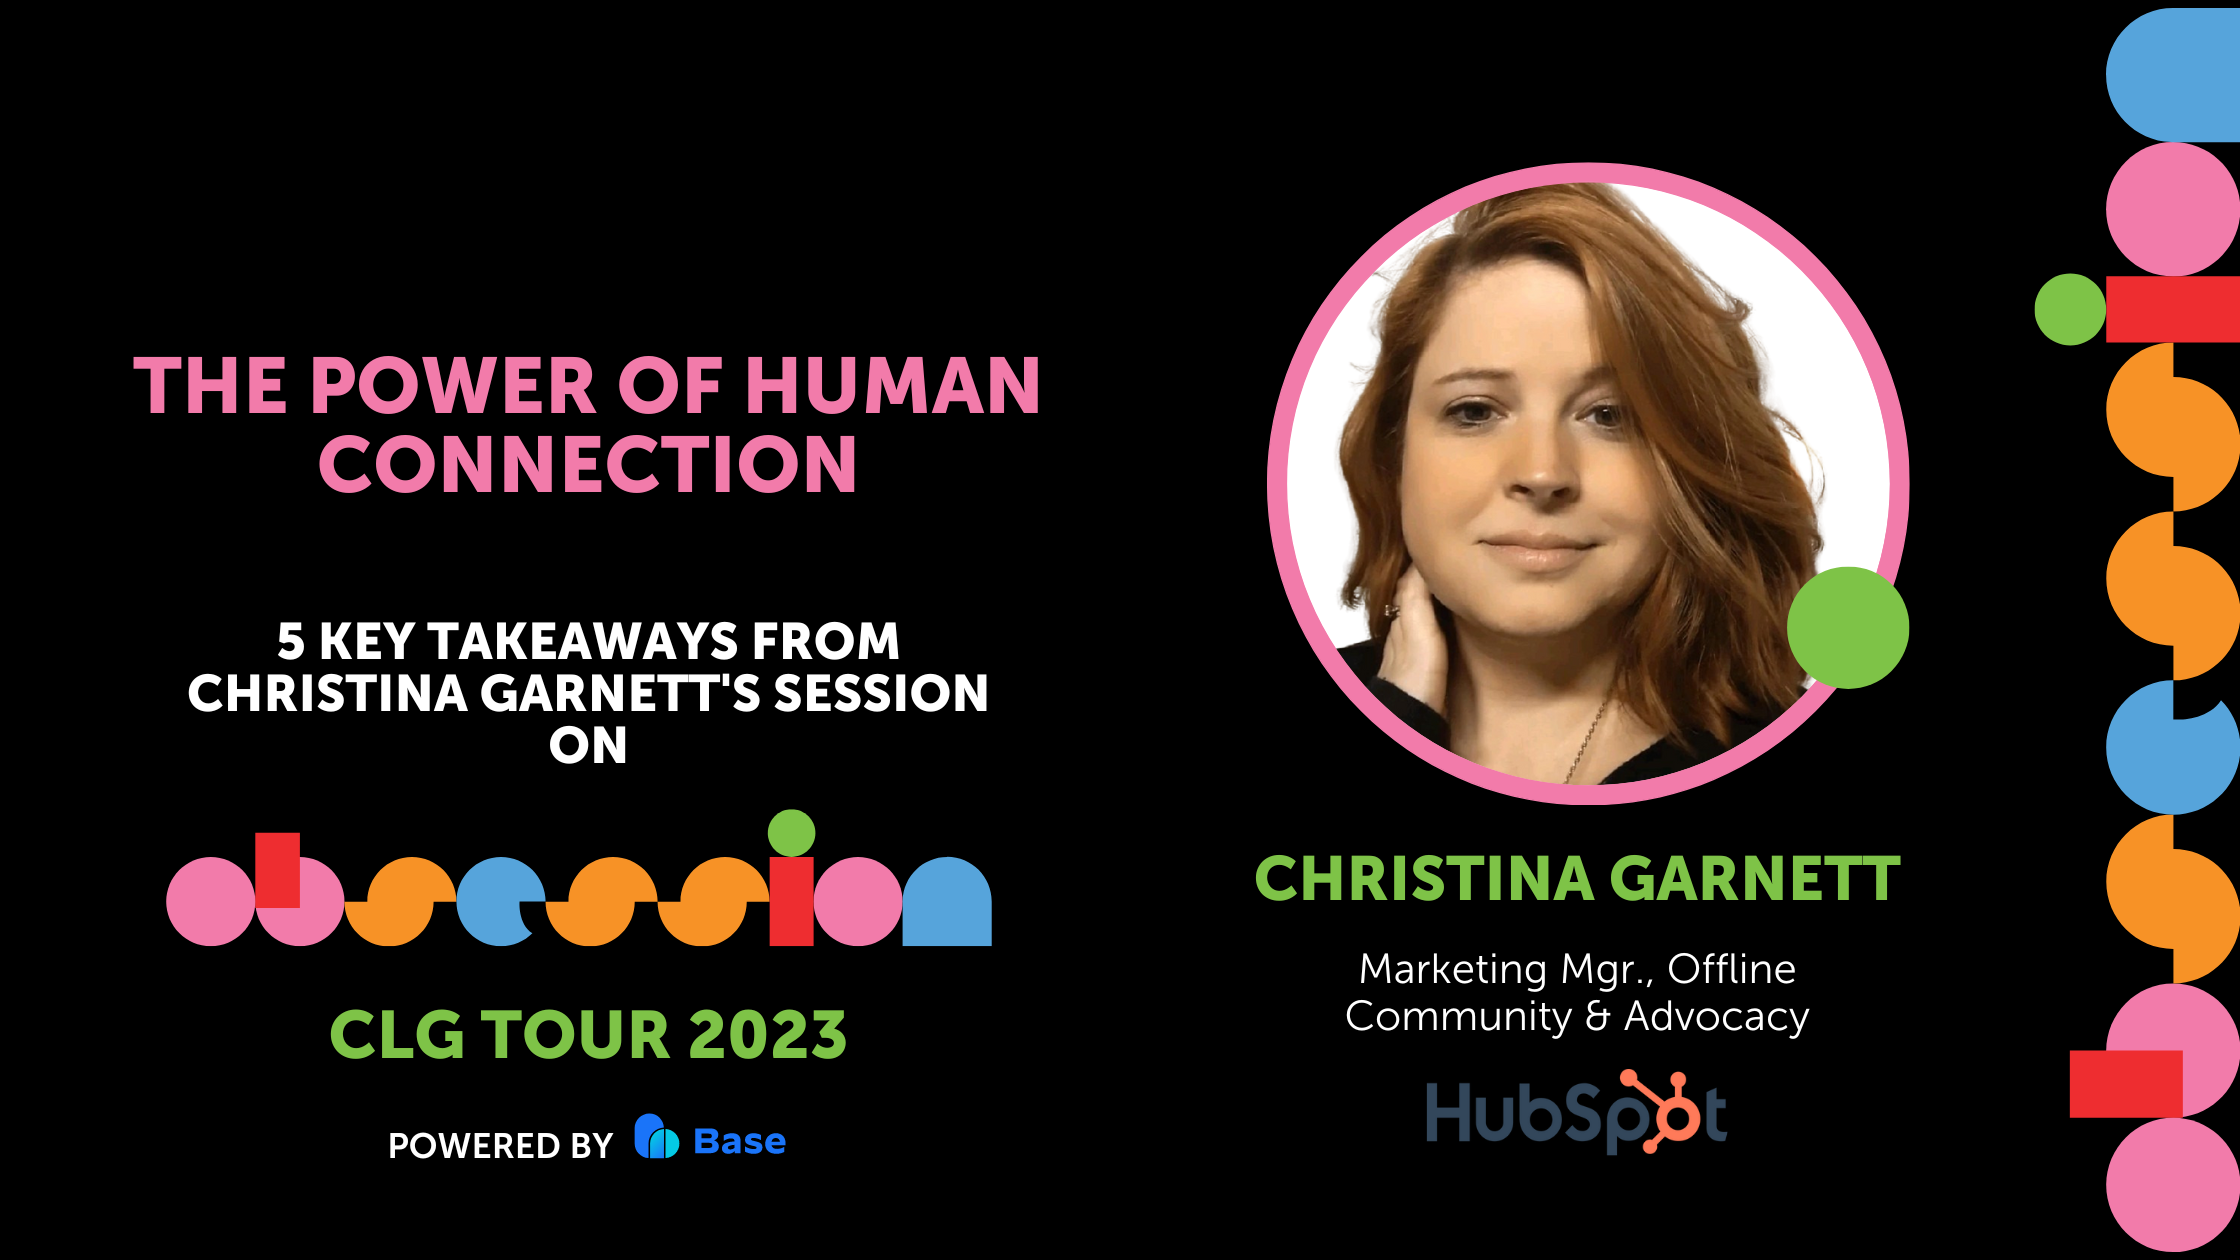 The Power of Human Connection: 5 Key Takeaways from Christina Garnett’s Session on The Obsession CLG Tour 2023